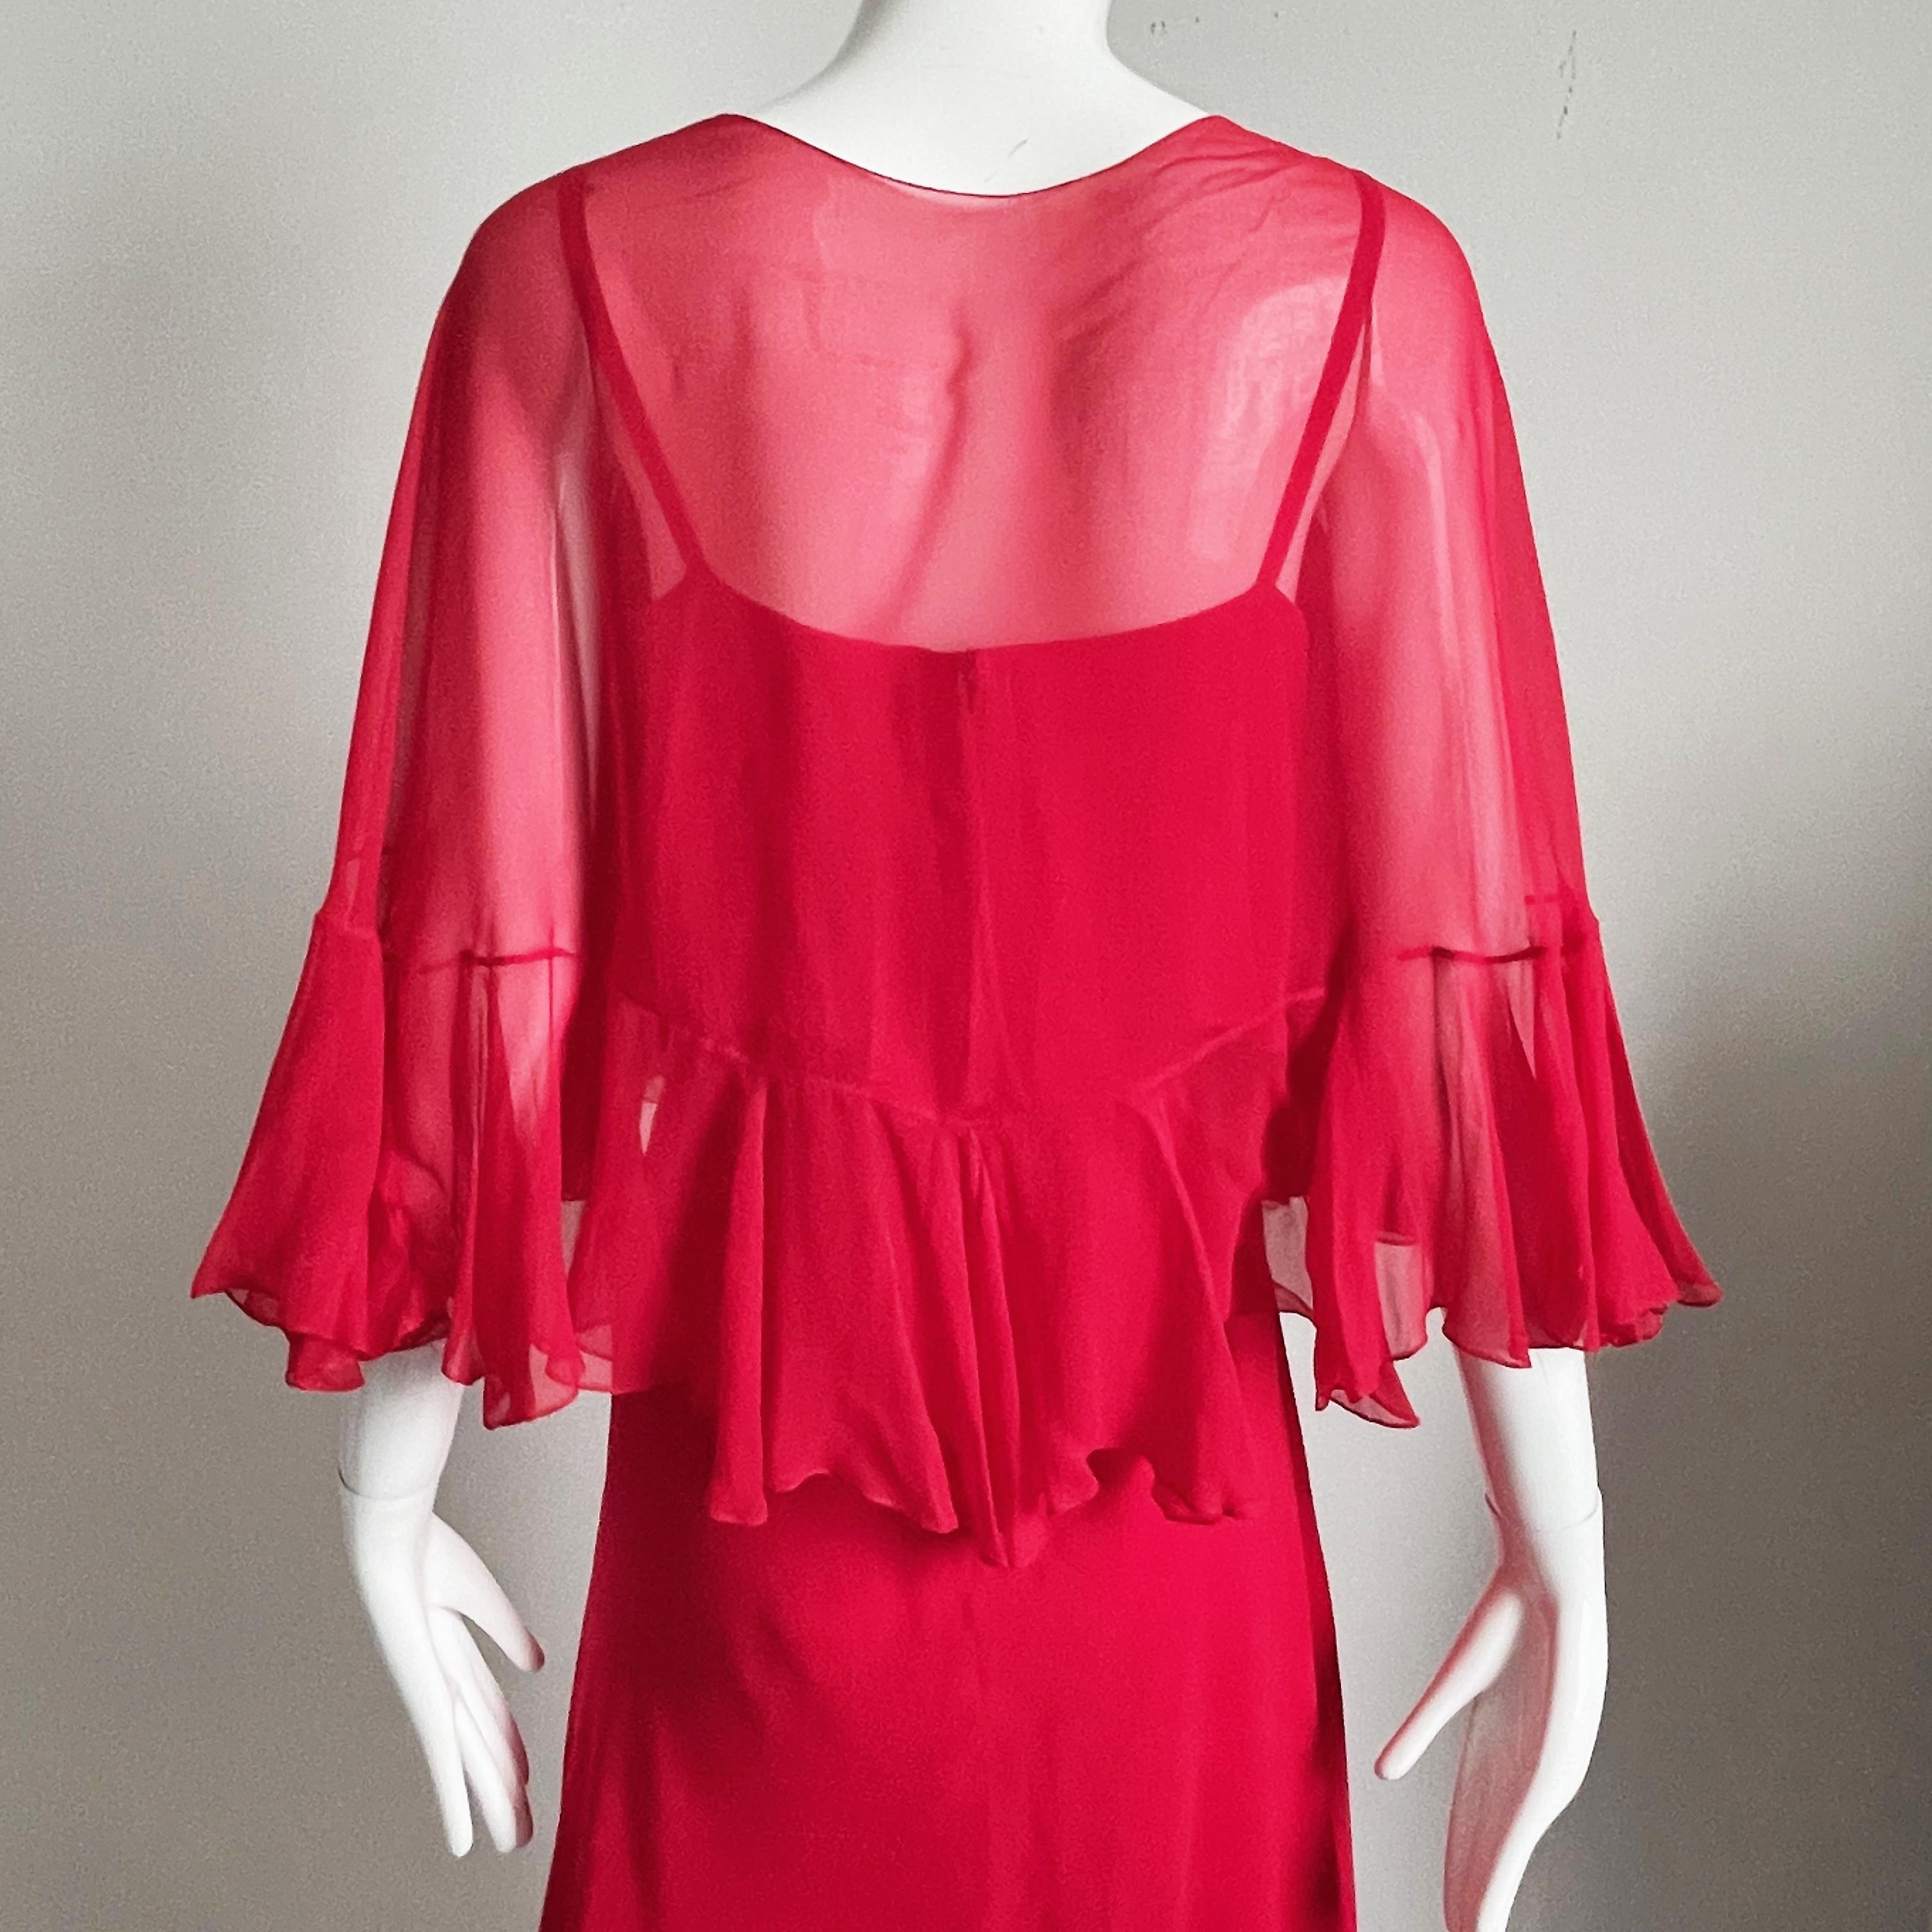 Pauline Trigere Dress and Shawl 2pc Set Red Silk Chiffon Loose Ruffles Vintage For Sale 10